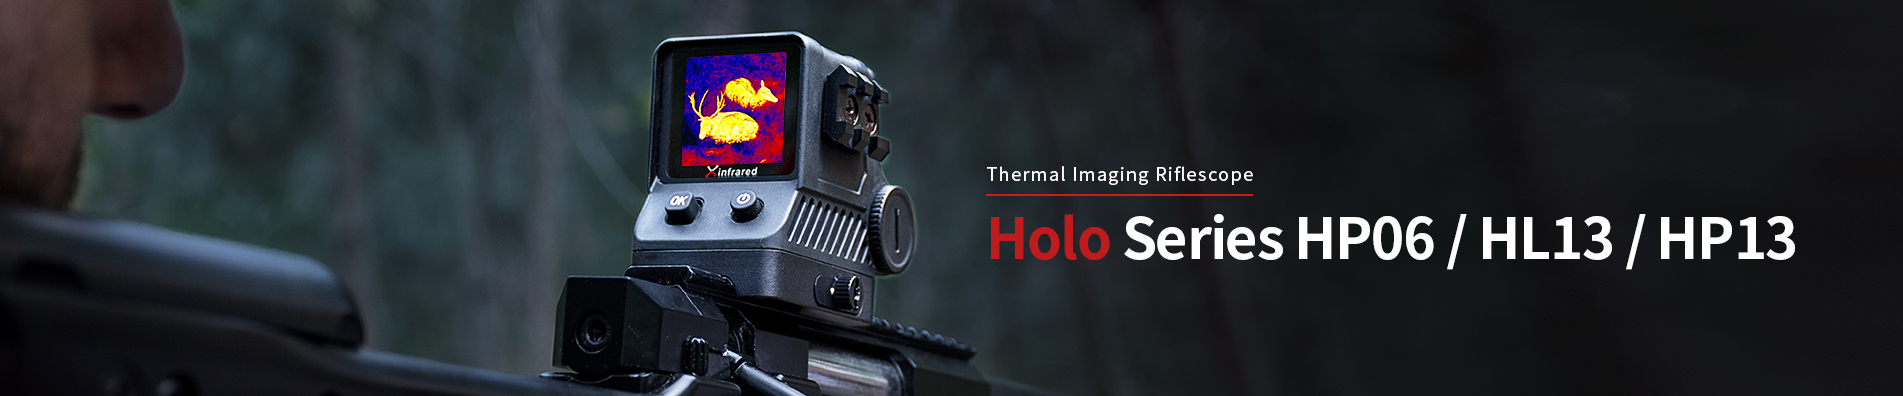 Thermal Imaging Riflescope Holo Series